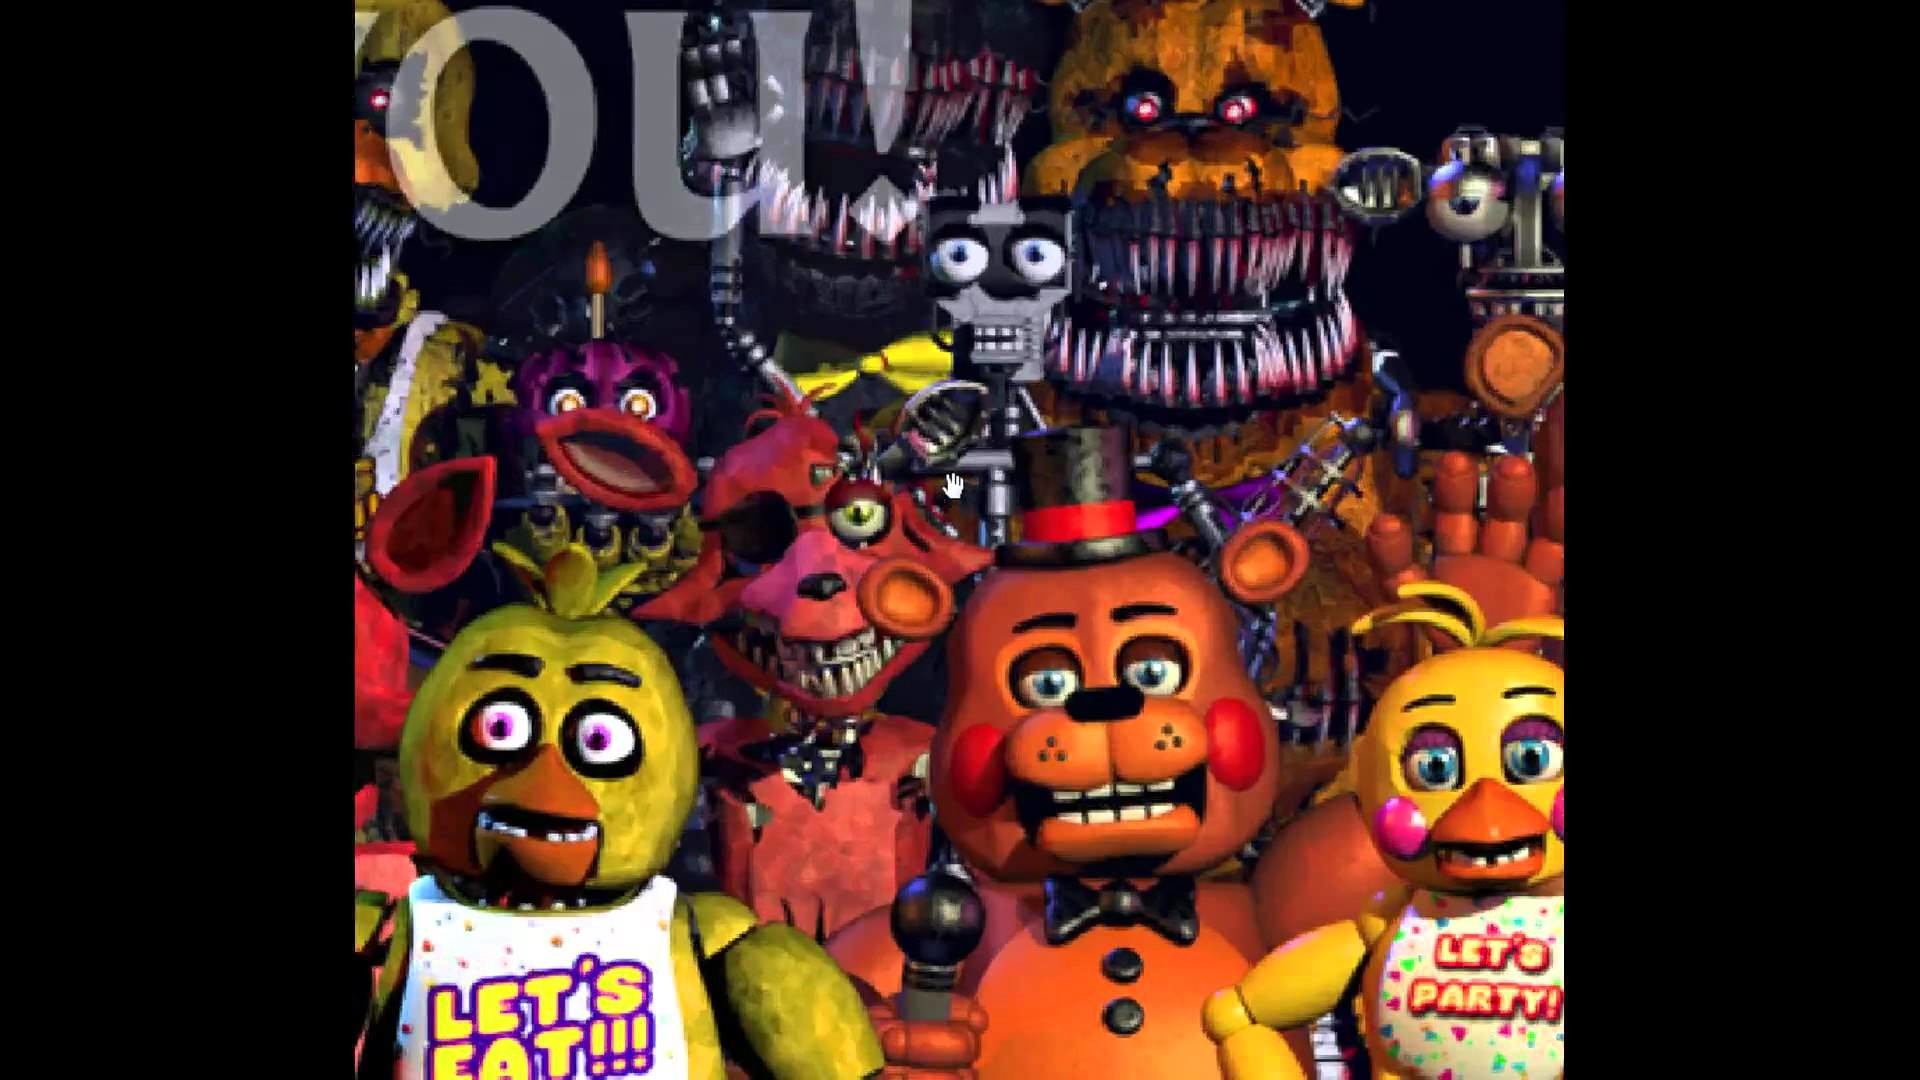 1920x1080 Five Nights At Freddy's - Thank You Image [Endoskeleton]